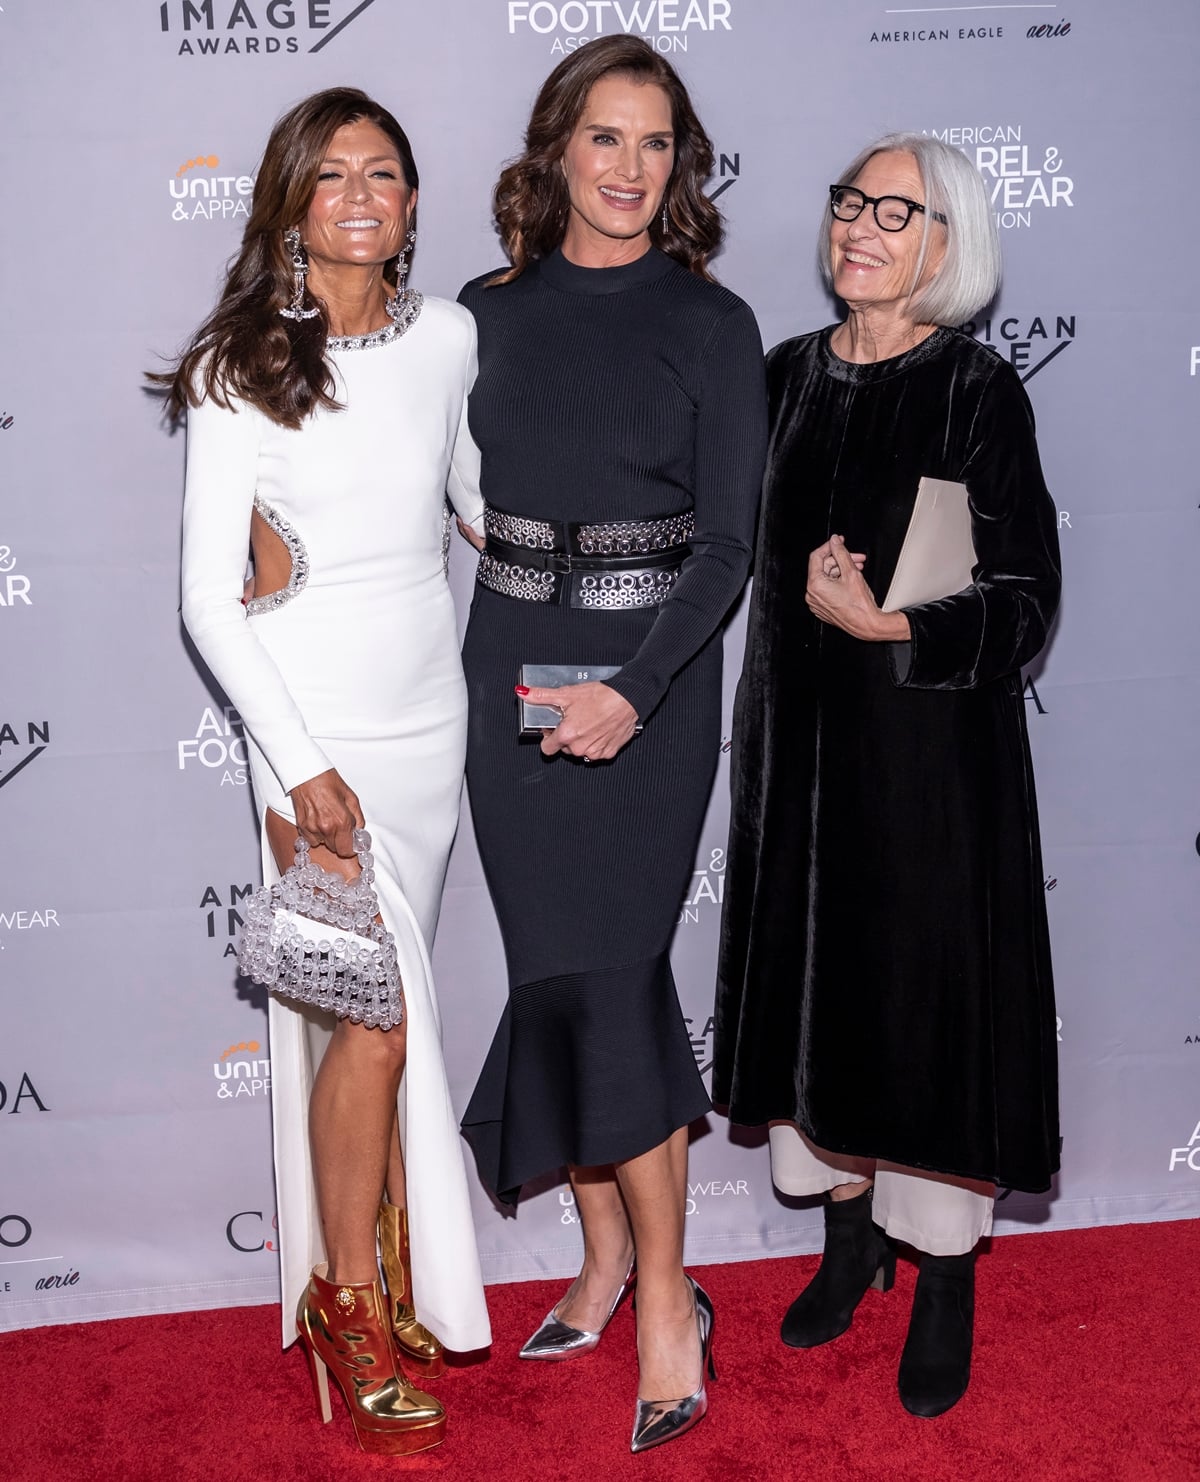 Designer Ruthie Davis, Brooke Shields, and Designer Eileen Fisher attend the AAFA American Image Awards 2019 at The Plaza on April 15, 2019, in New York City